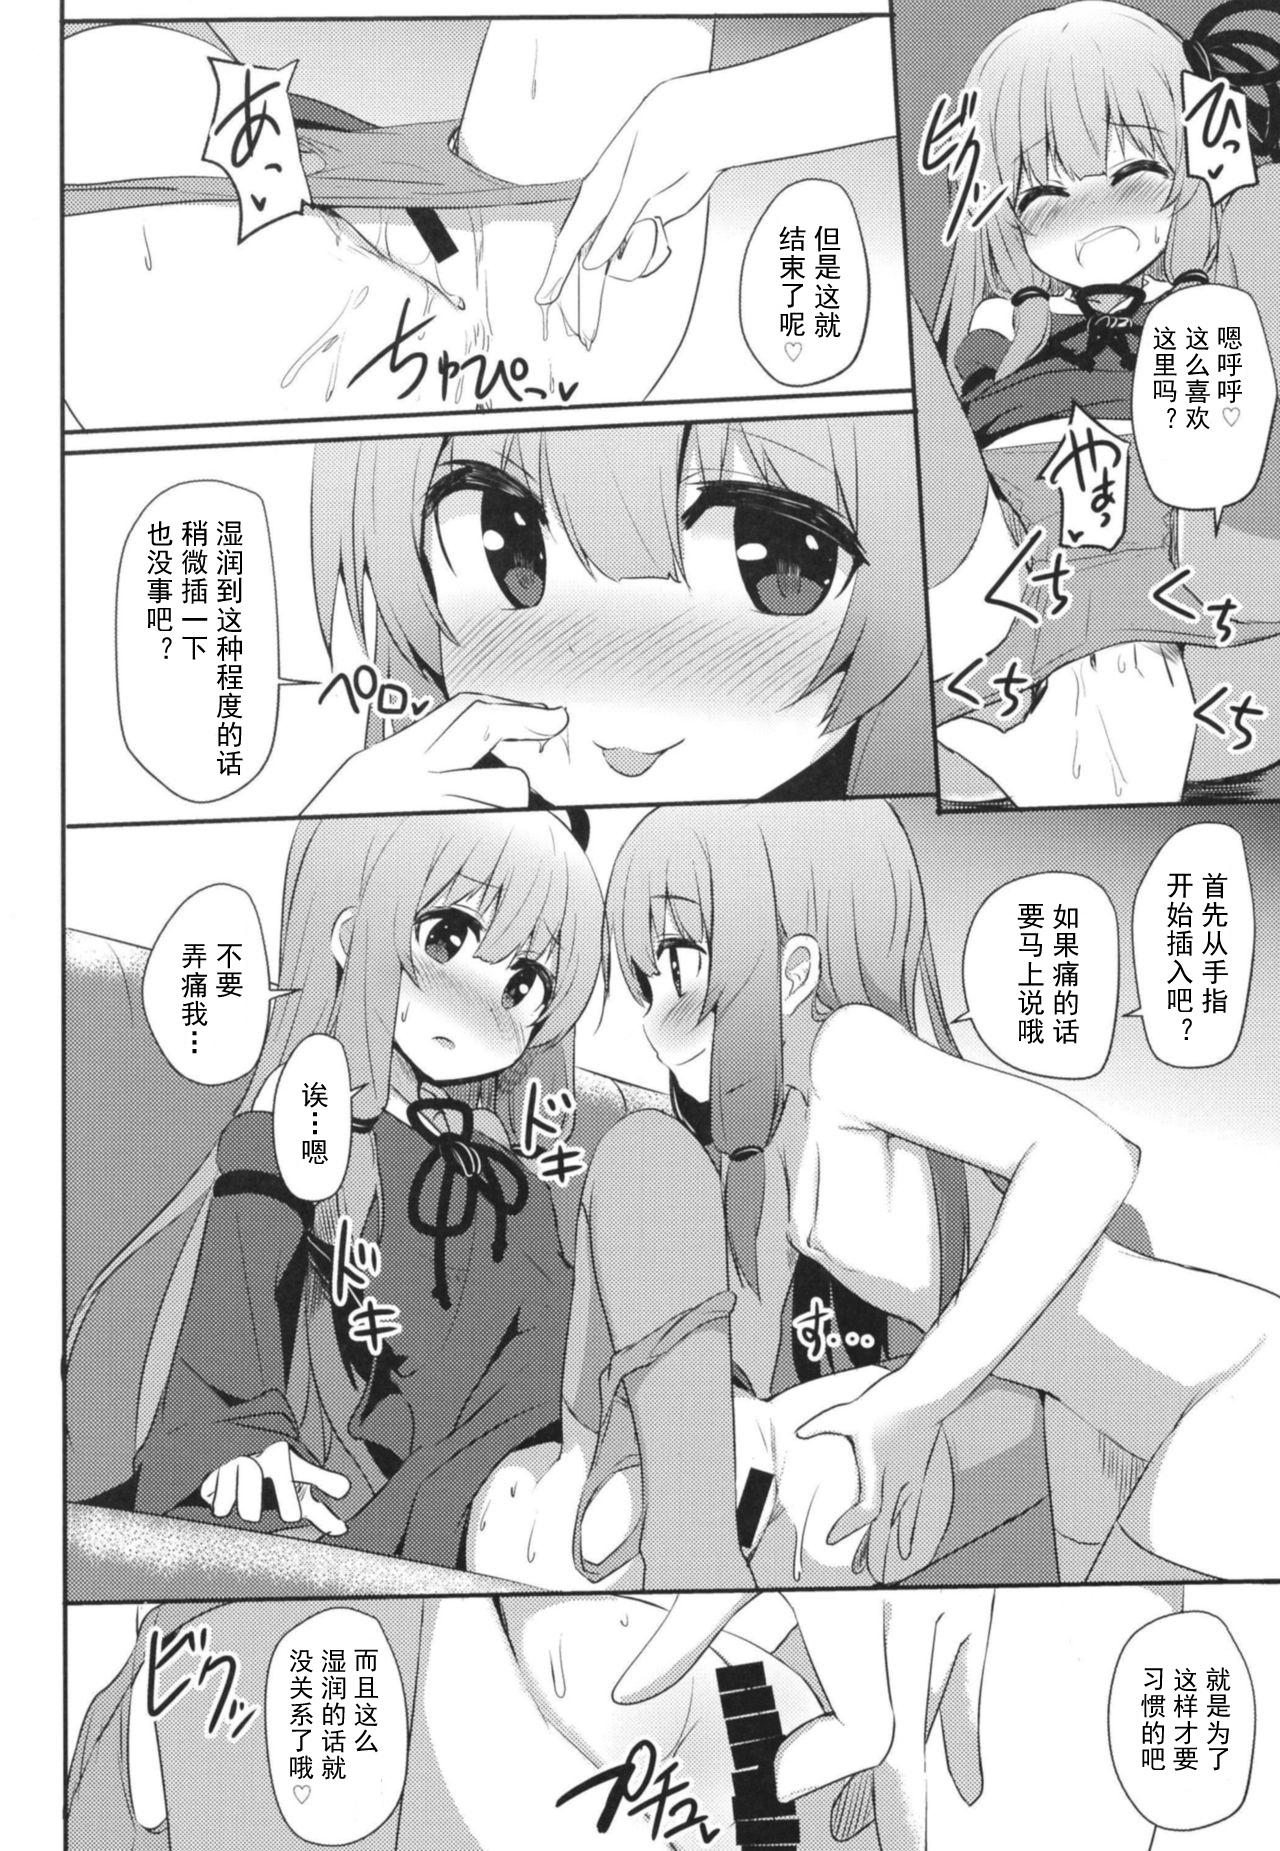 Gemidos [Milk Pudding (Jamcy)] Akane-chan Challenge! 4-kaime (VOICEROID) [Chinese] [古早个人汉化] [Digital] - Voiceroid Milf Fuck - Page 6